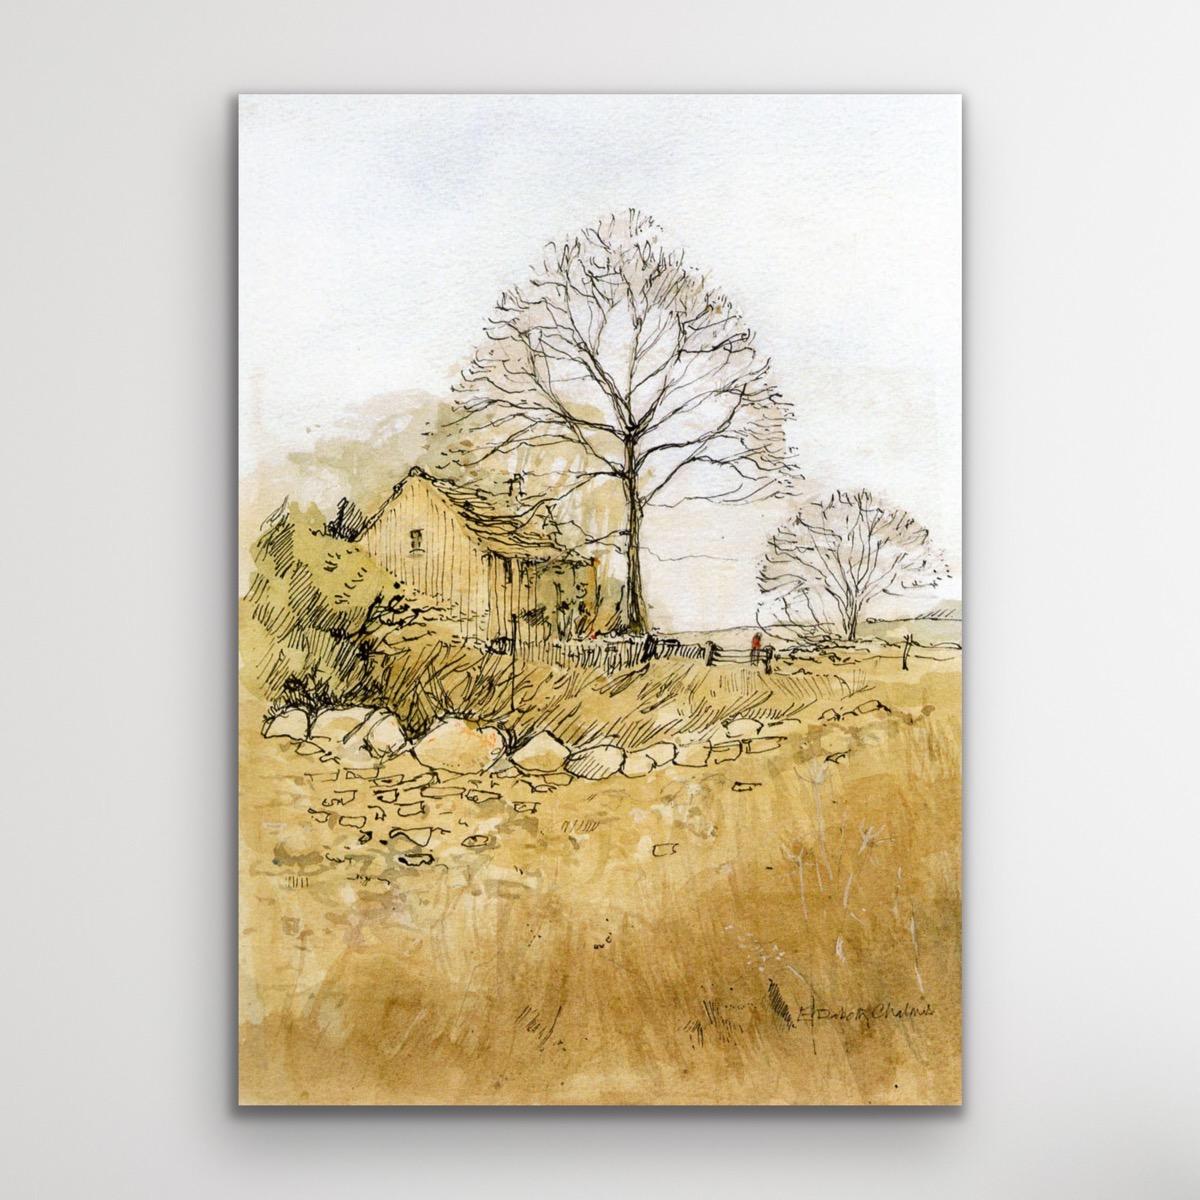 Winter Trees in The Cotswolds, Elizabeth Chalmers Watercolour Landscape Painting 2